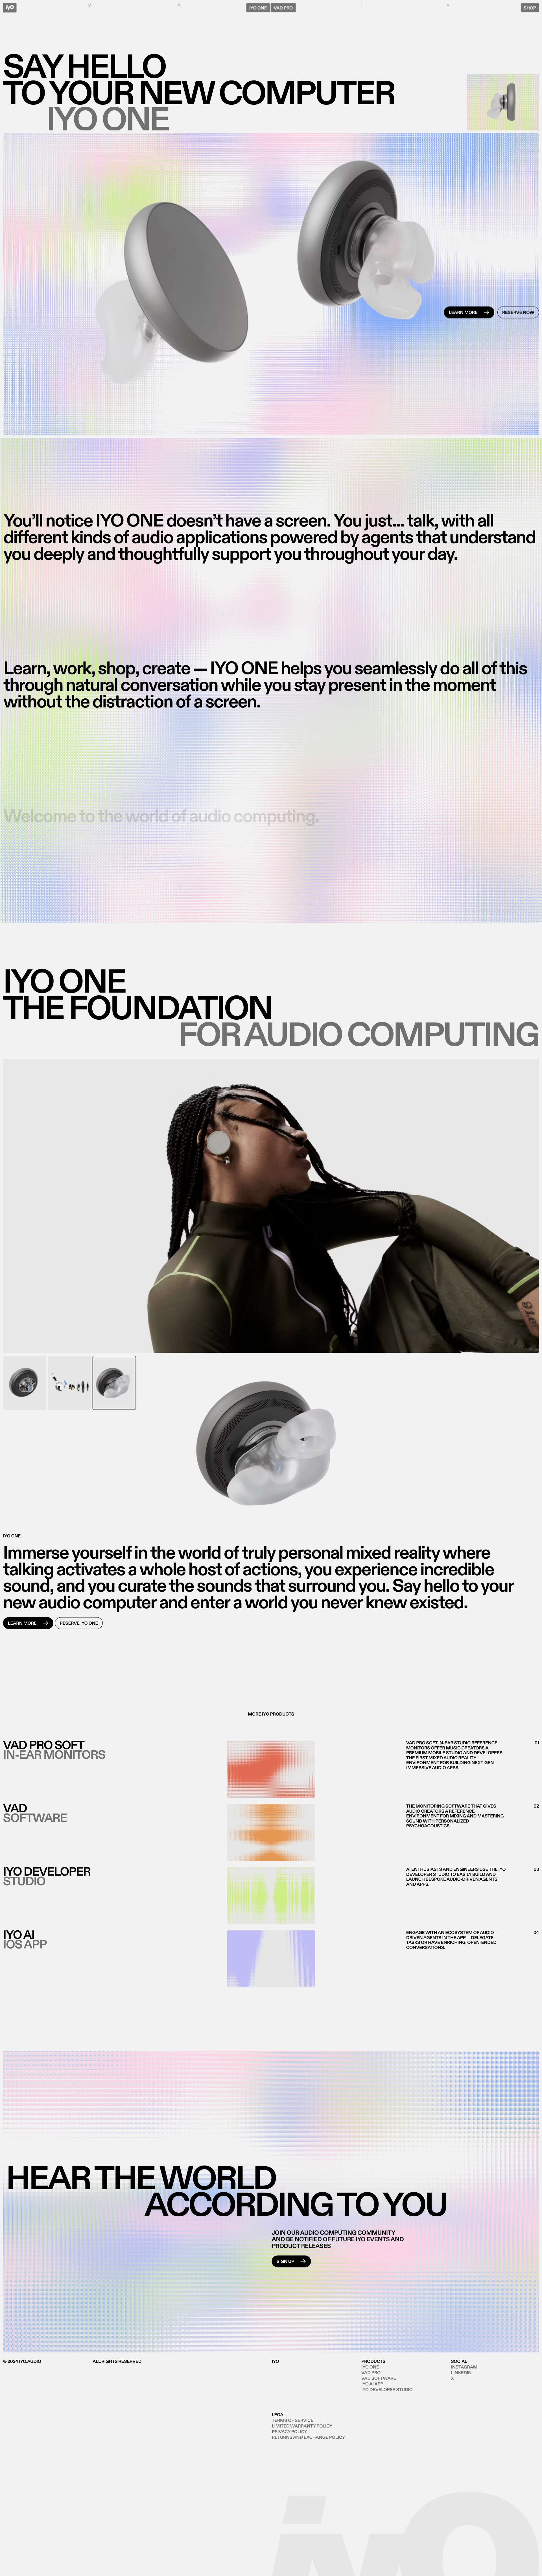 IYO Landing Page Example: Immerse yourself in the world of truly personal mixed reality where talking activates a whole host of actions, you experience incredible sound, and you curate the sounds that surround you. Say hello to your new audio computer and enter a world you never knew existed.